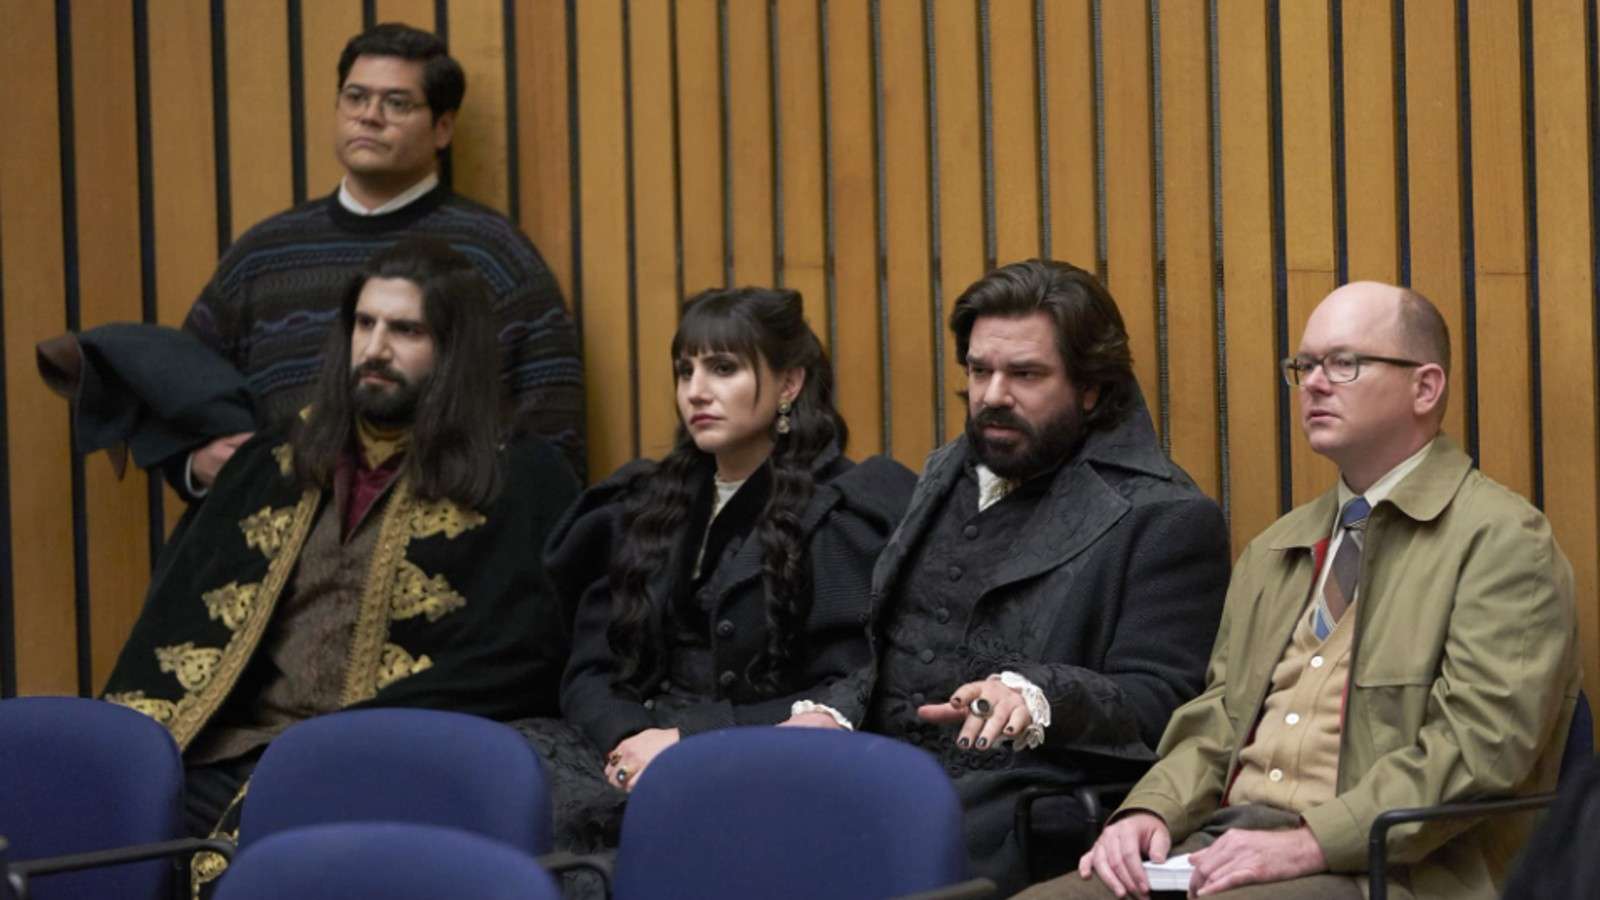 The cast of What We Do in the Shadows attend a town meeting